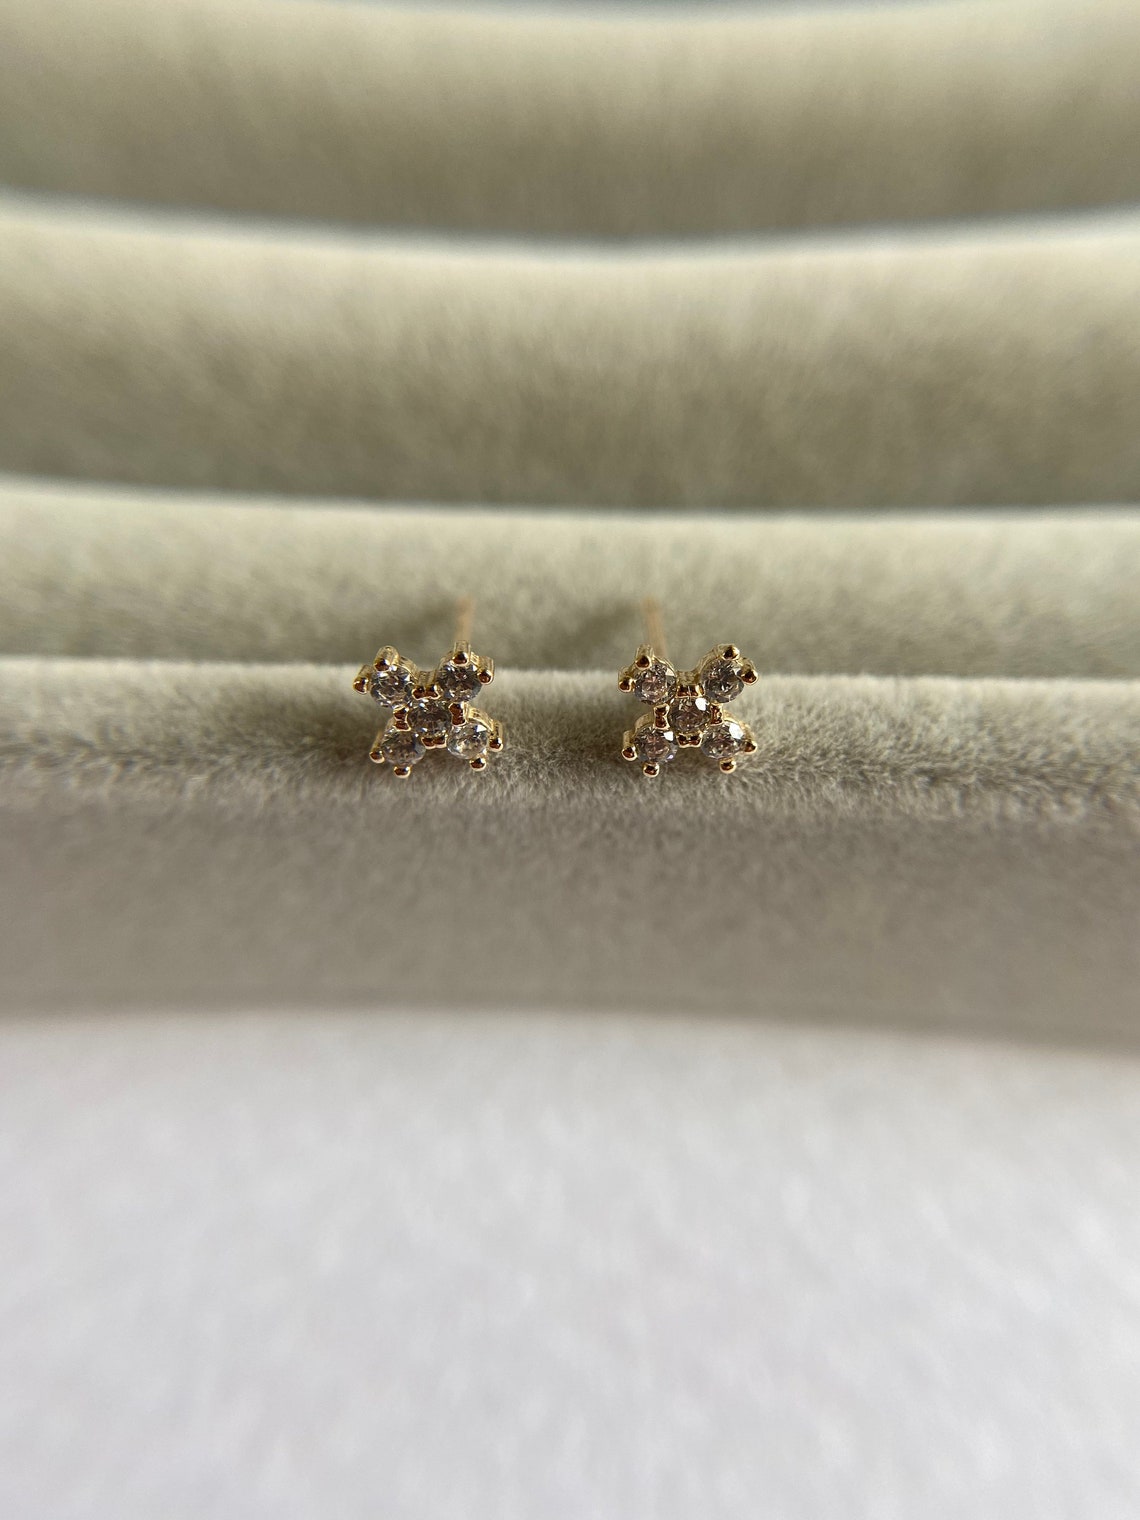 10K Solid Gold/ Tiny CZ Cross Stud Earrings 10K Solid Gold | Etsy